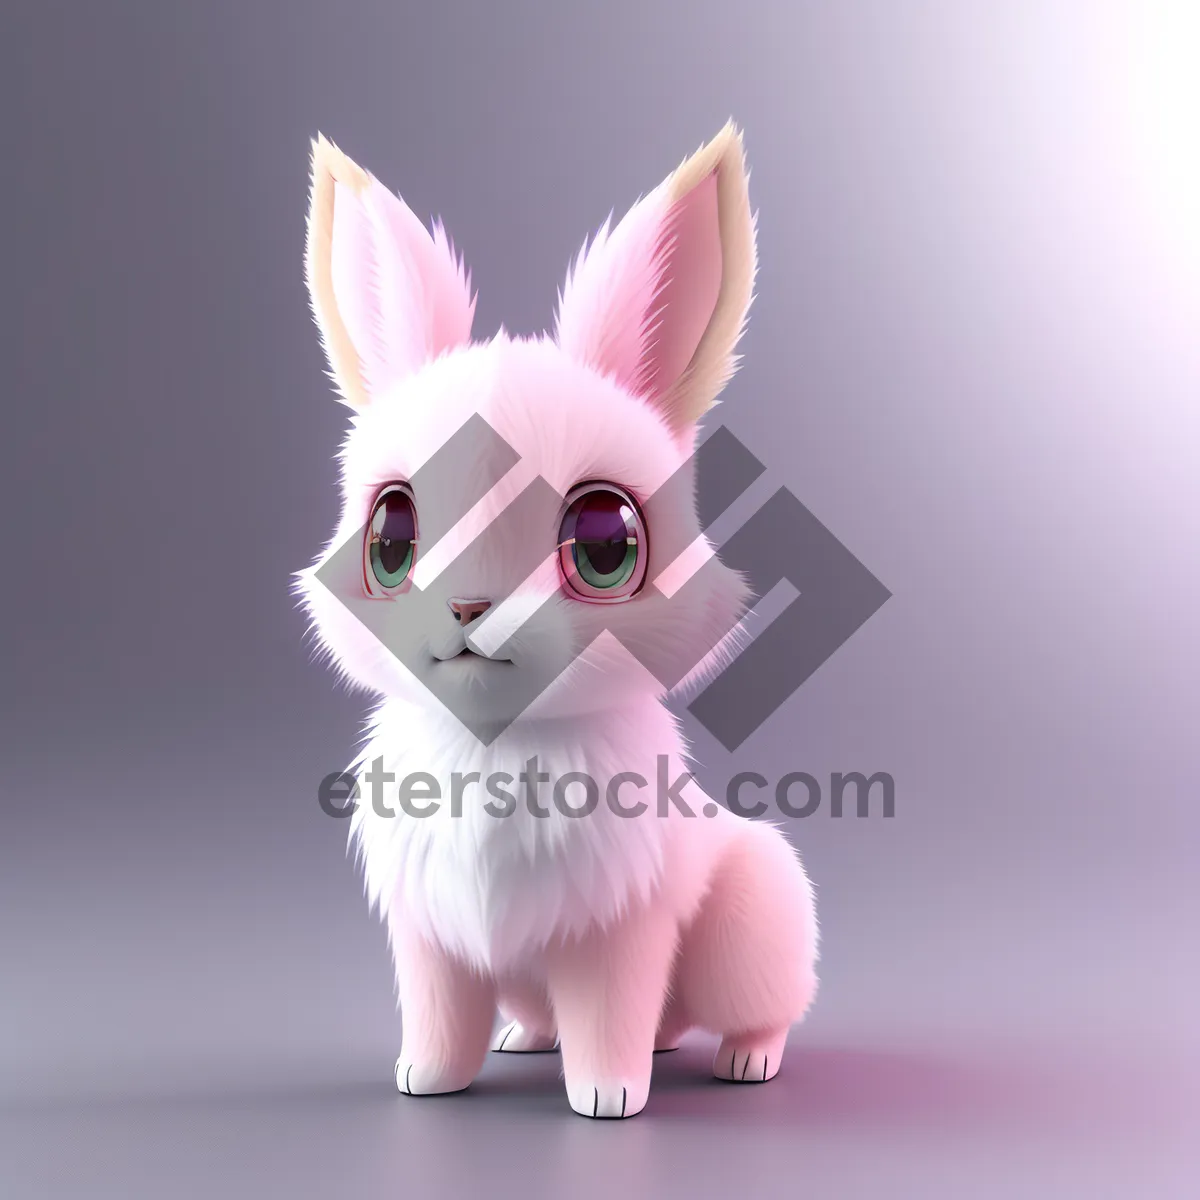 Picture of Fluffy Bunny Ears: Adorable Domestic Pet Portrait